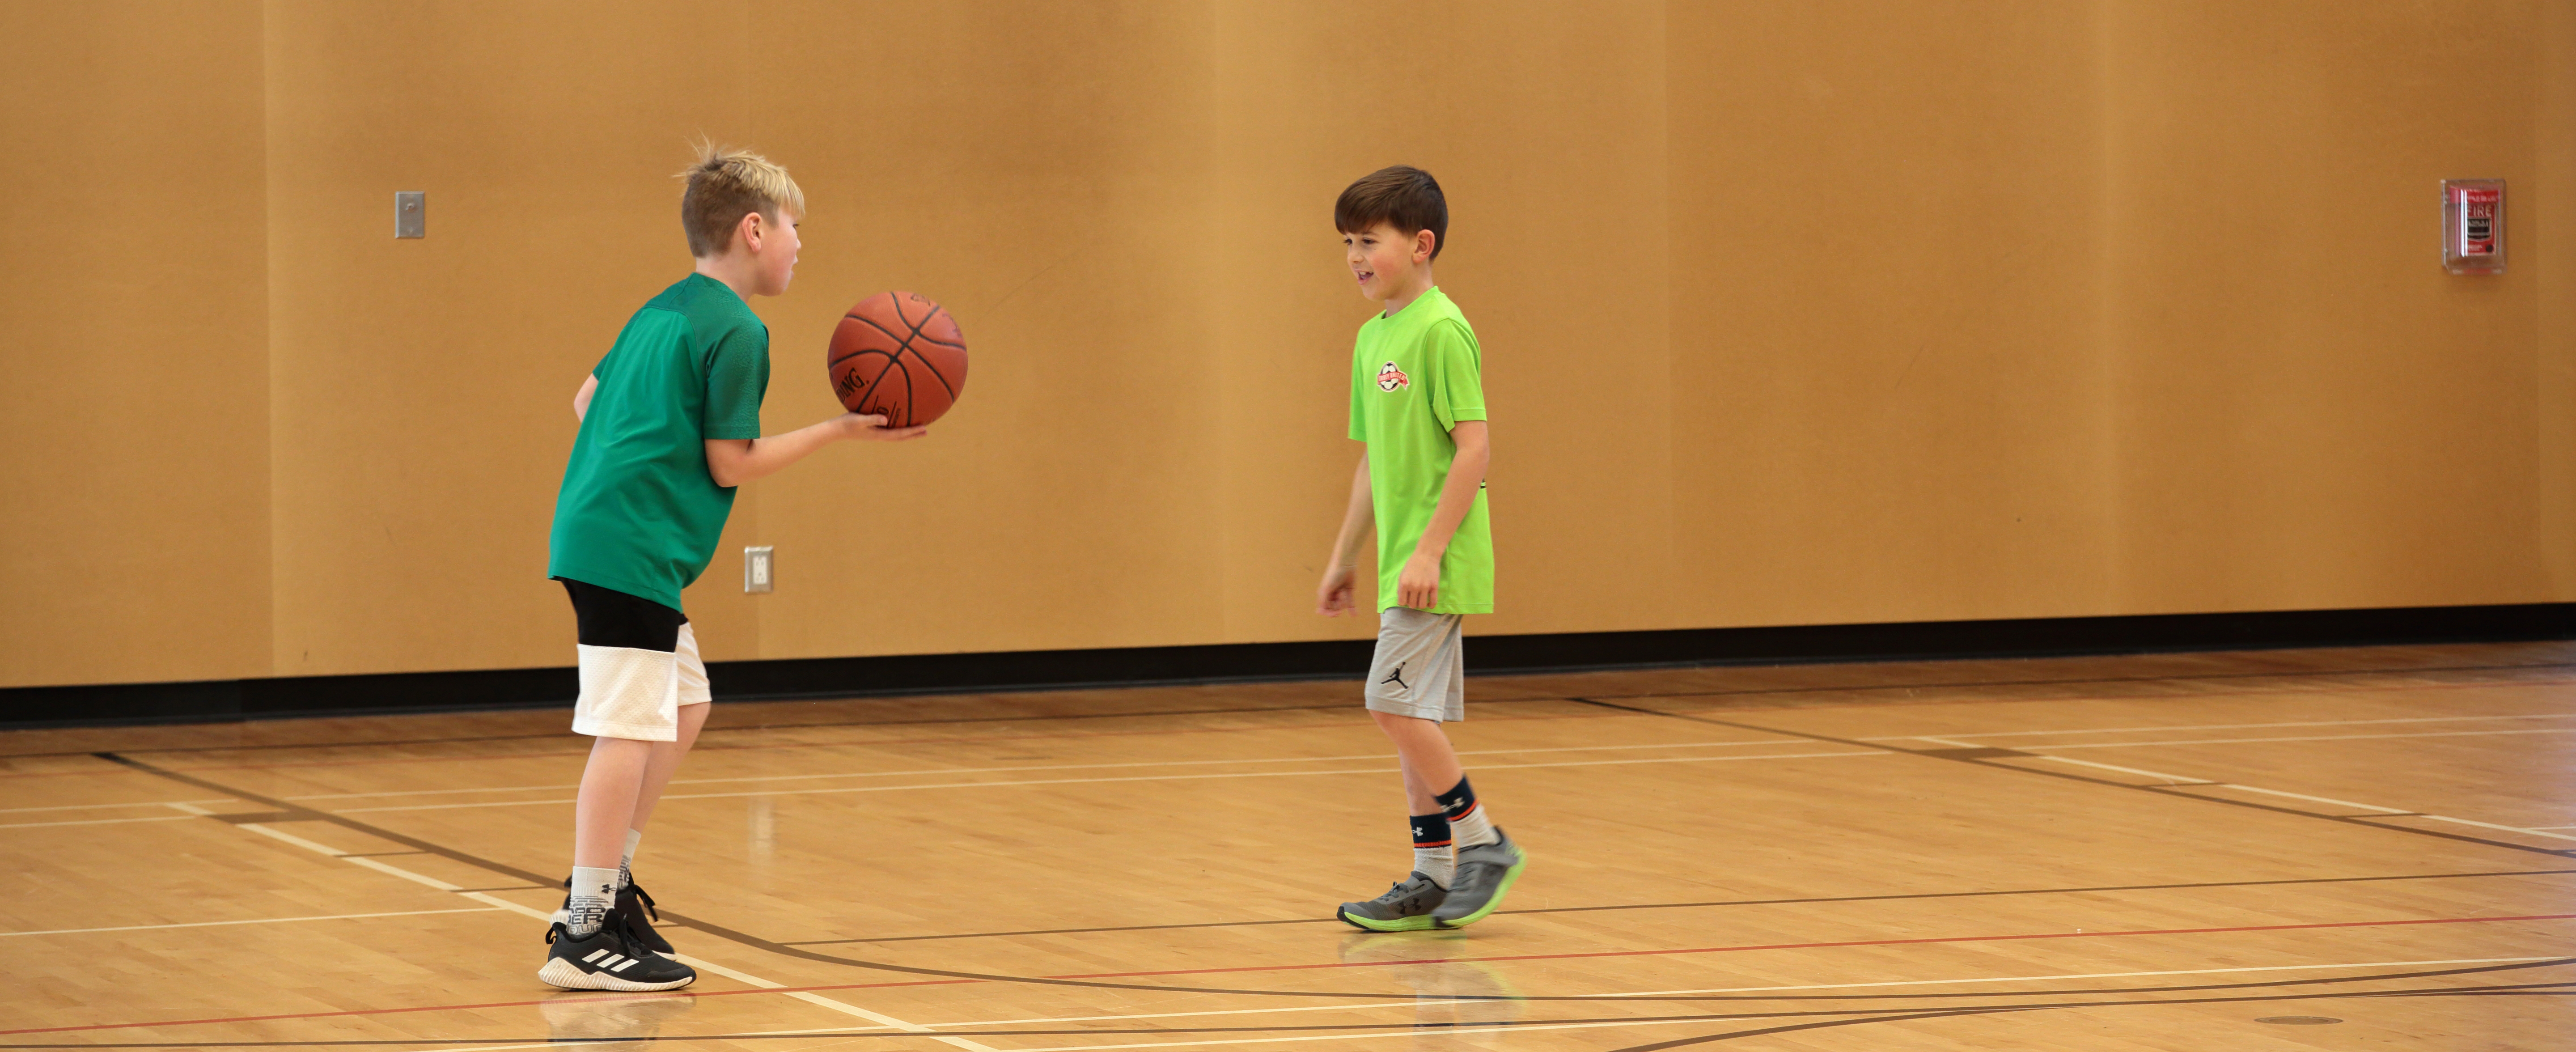 Two boys playing basketball in a gym